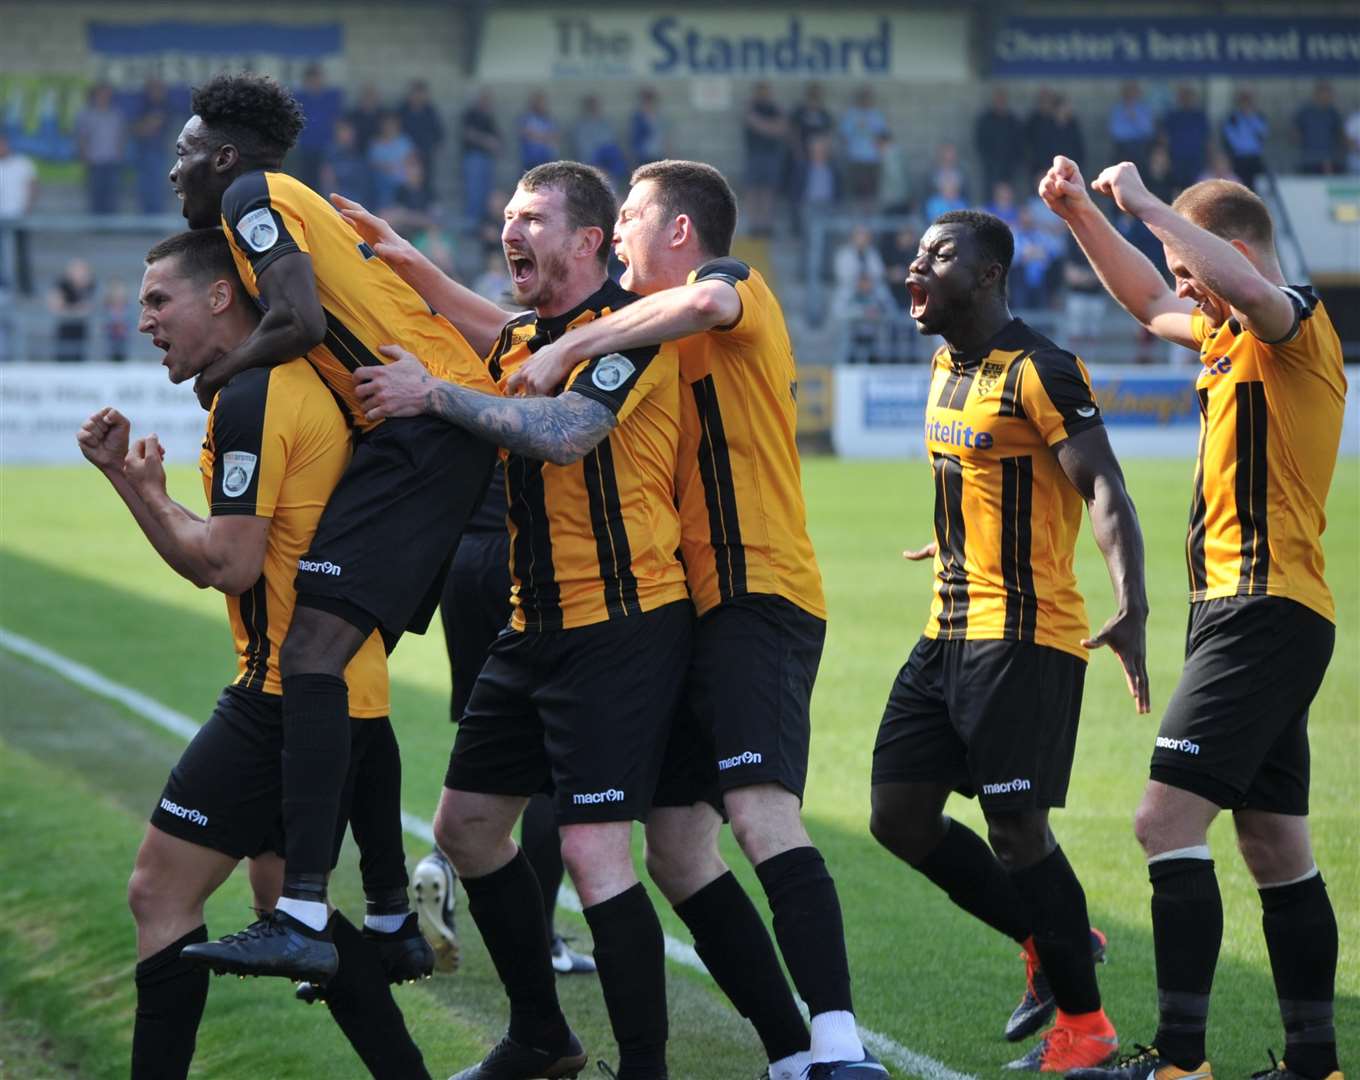 Safety secured after Josh Hare puts Maidstone 3-1 up at Chester Picture: Steve Terrell